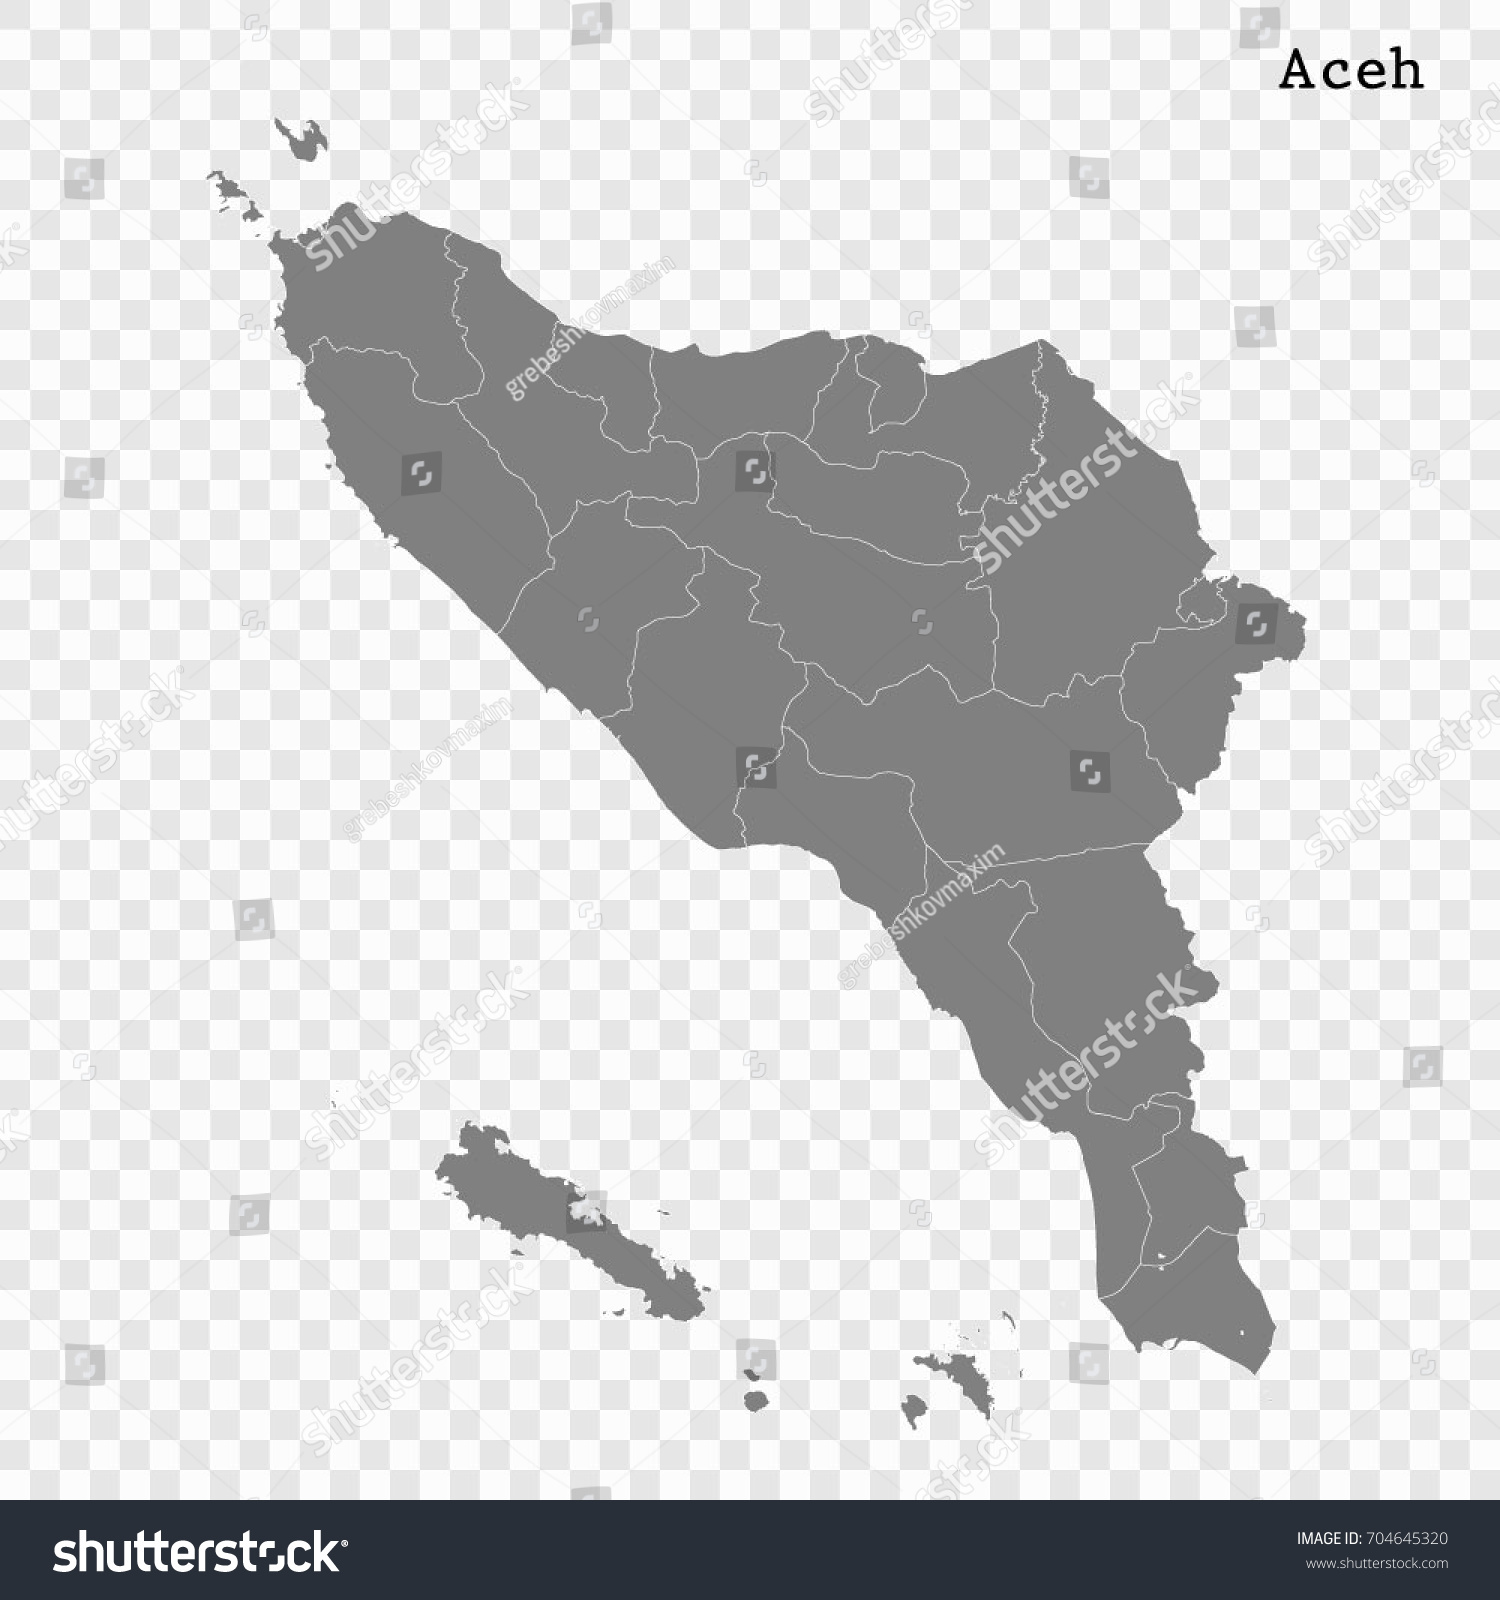 SVG of High Quality map of Aceh is a province of Indonesia, with borders of the regency svg